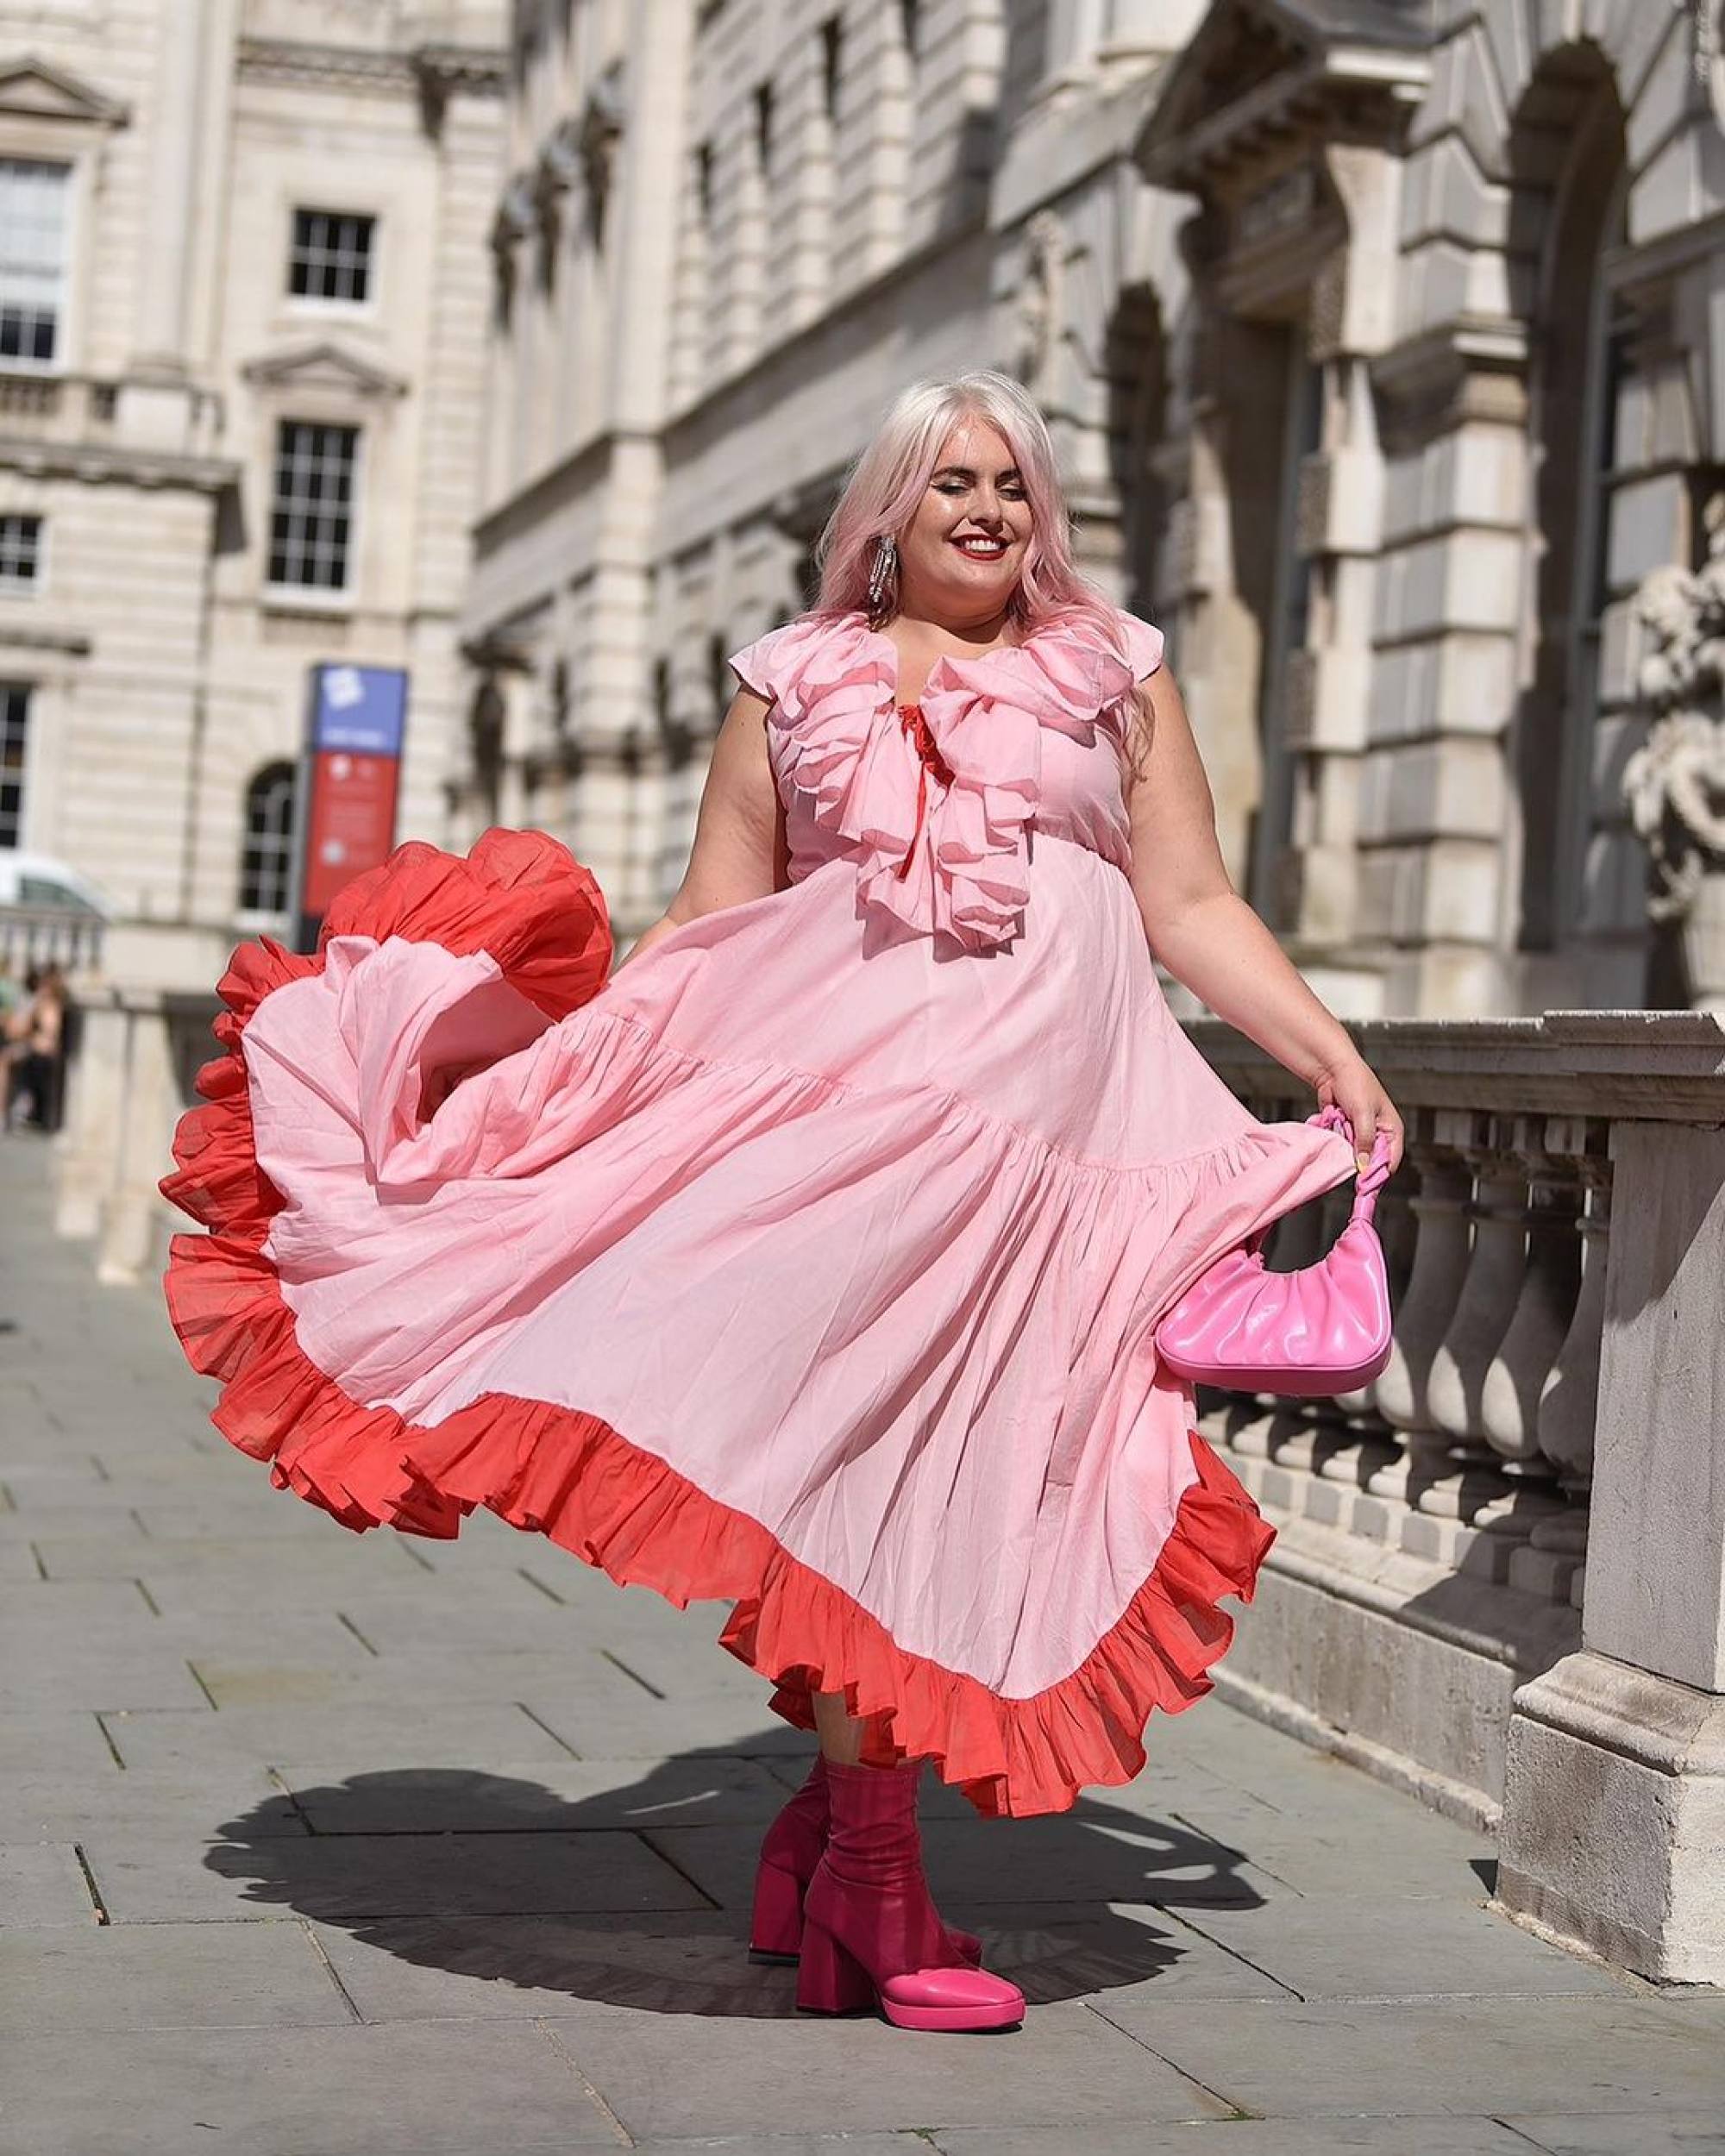 Meet the influencer counting curvy models at London Fashion Week: plus-size  icon Felicity Hayward has worked with Mac and The Body Shop – and  'despises' what the Kardashians did to body image